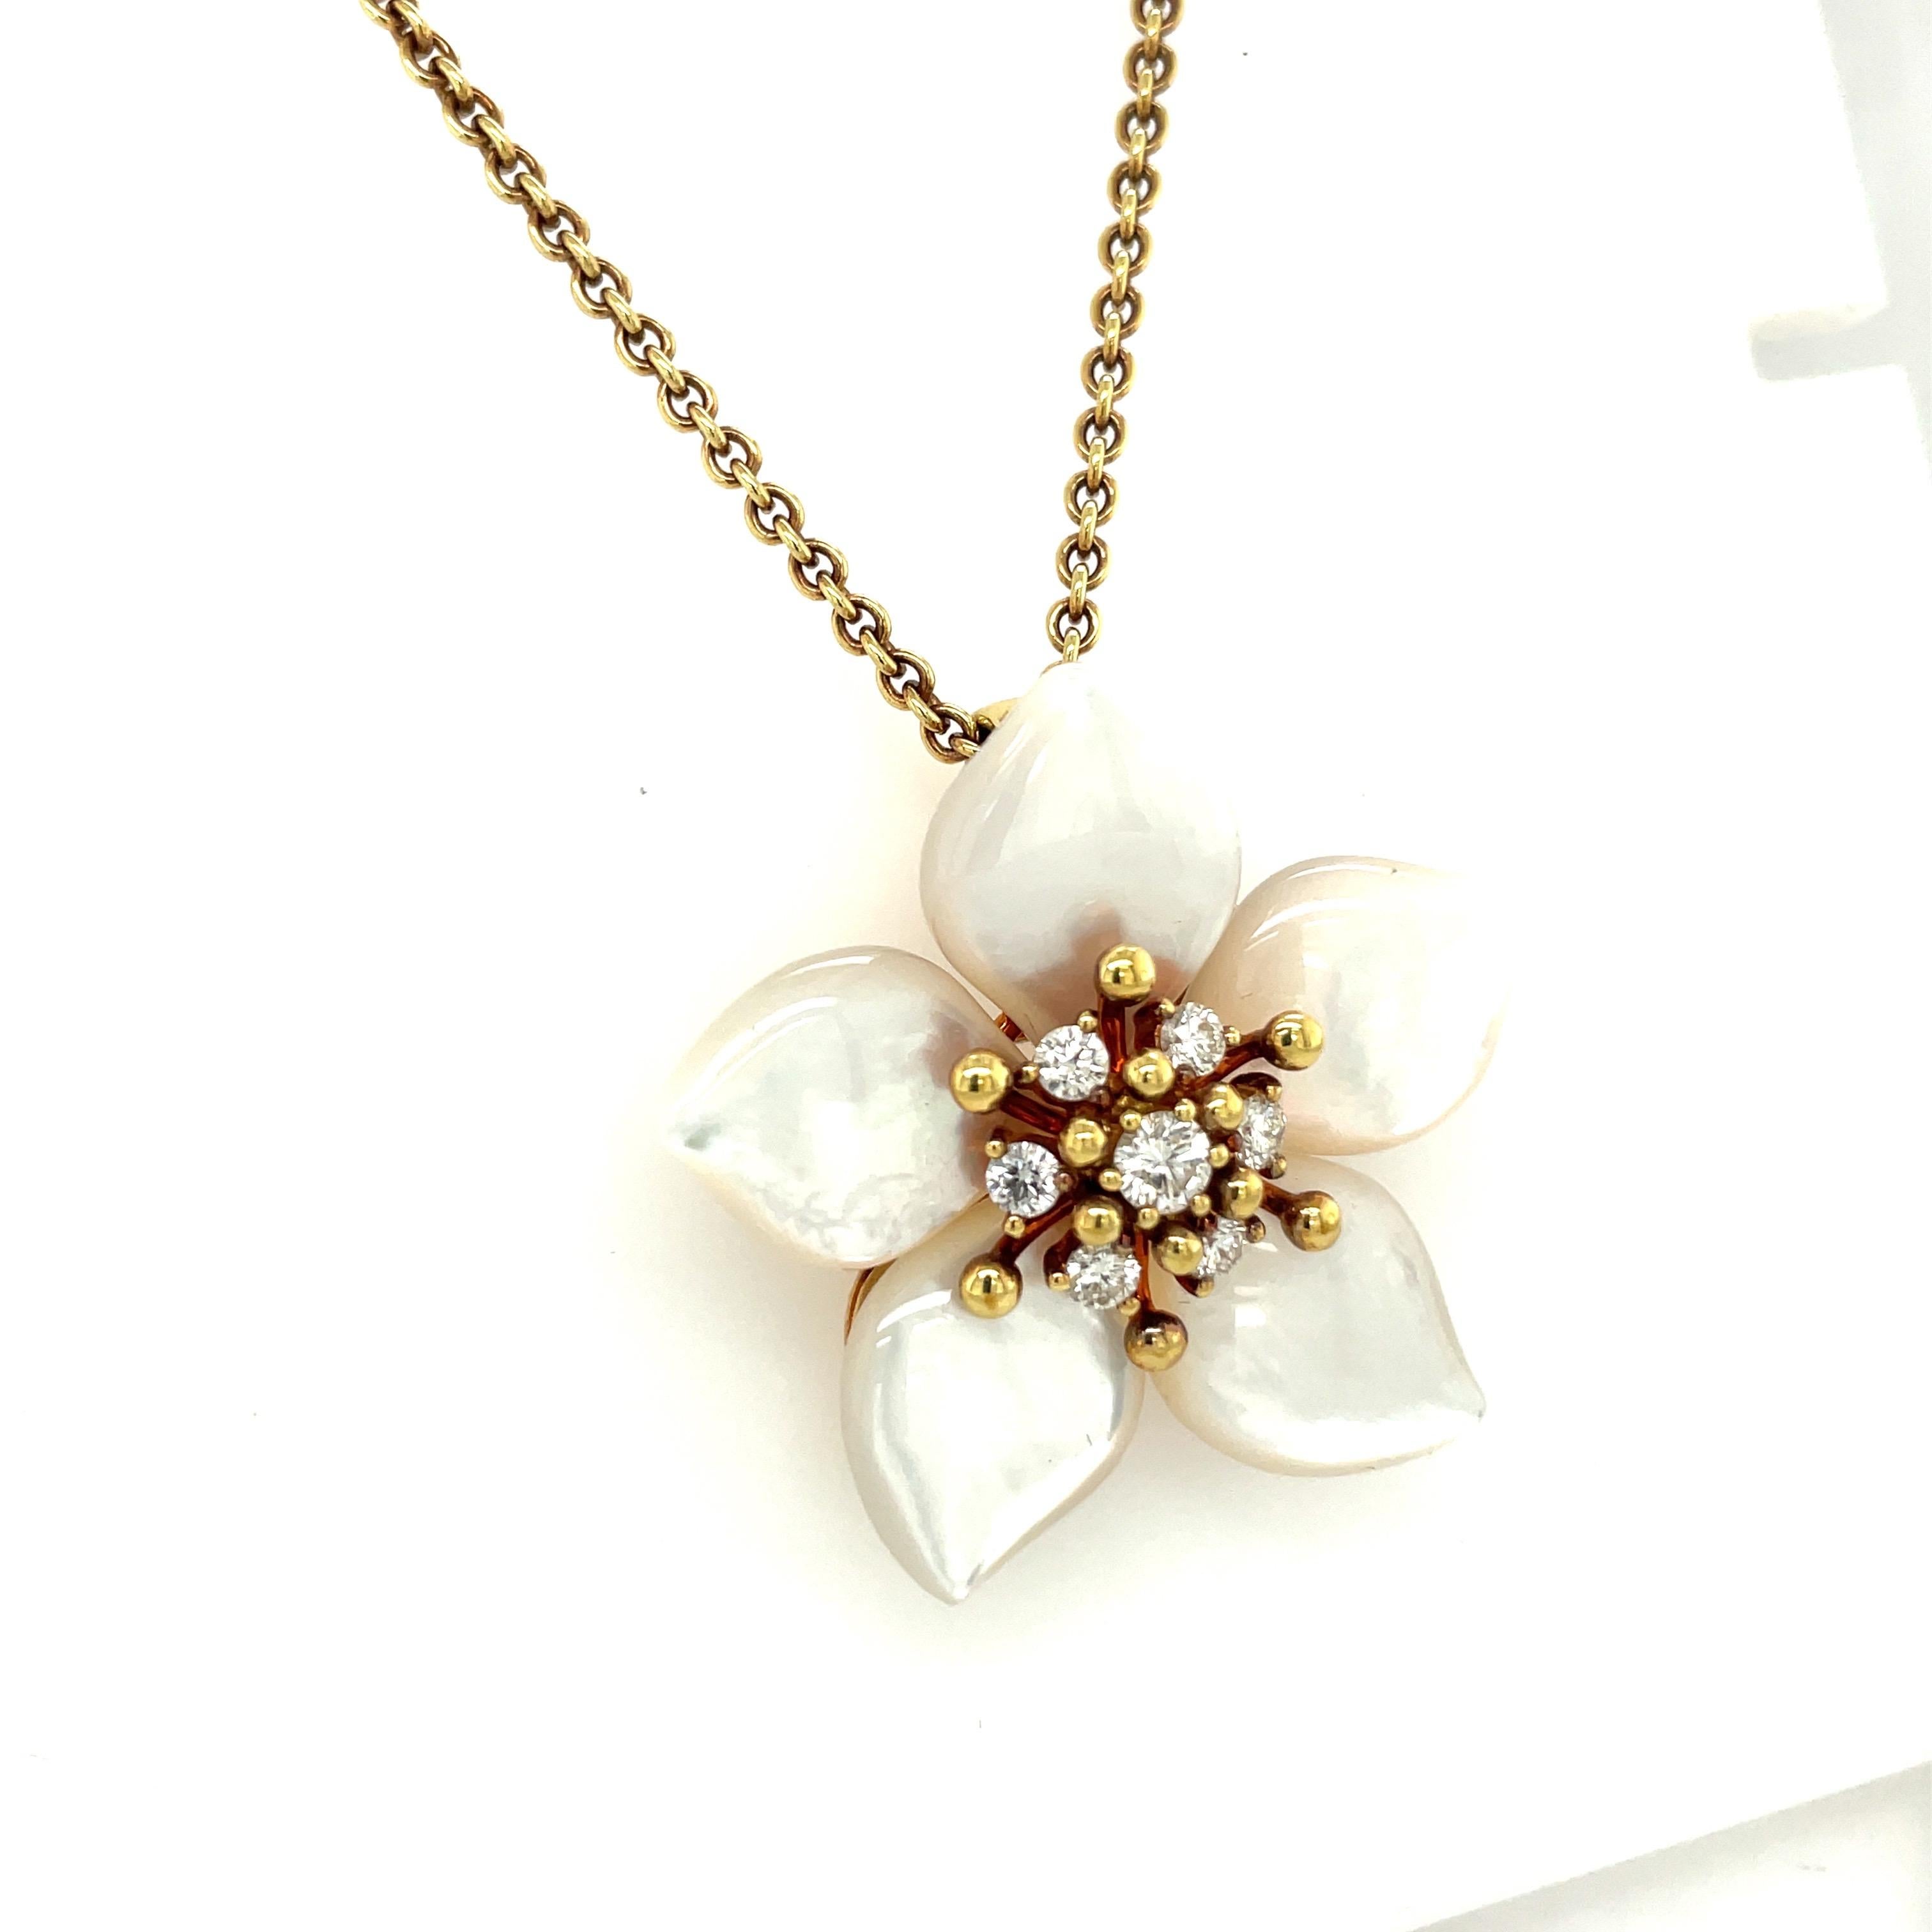 Designed by Asch Grossbardt, this 18 karat yellow gold flower pendant is a unique piece. The petals are set with beautifully shaped mother of pearl. The center of the flower is set with 7 round brilliant diamonds totaling 0.85 carats. The flower